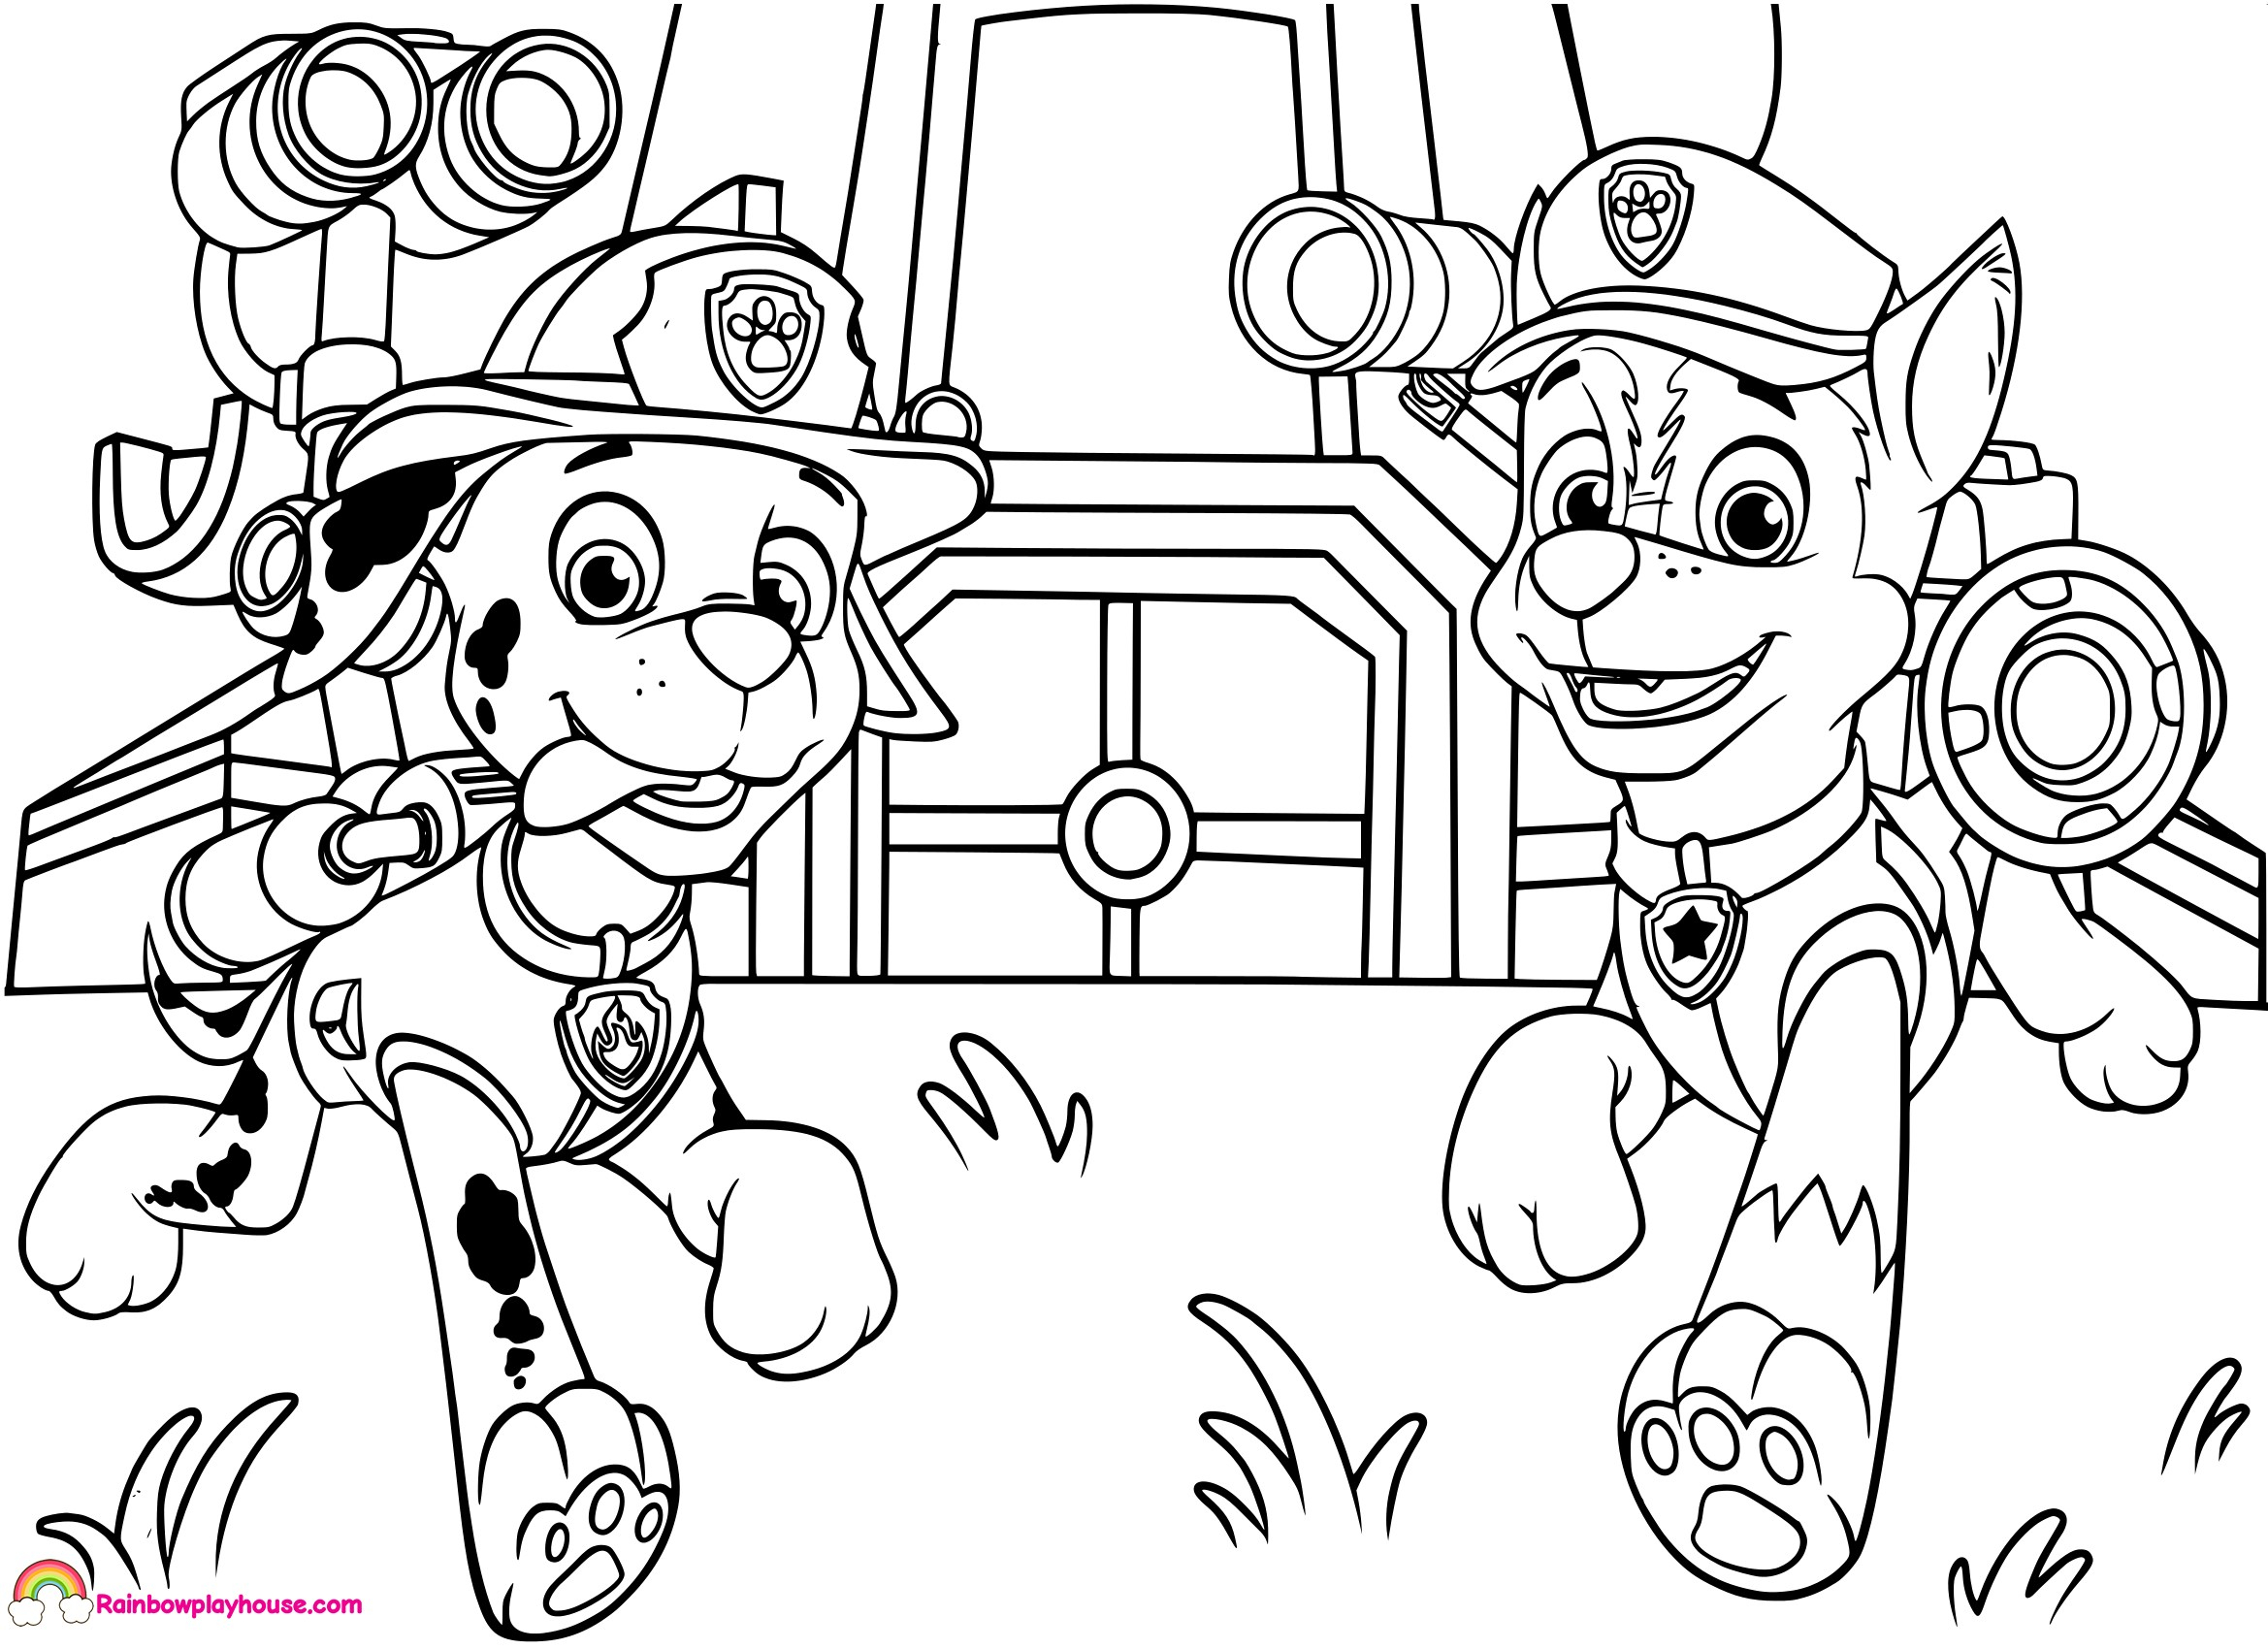 Download Paw Patrol Skye Coloring Pages - Coloring Home